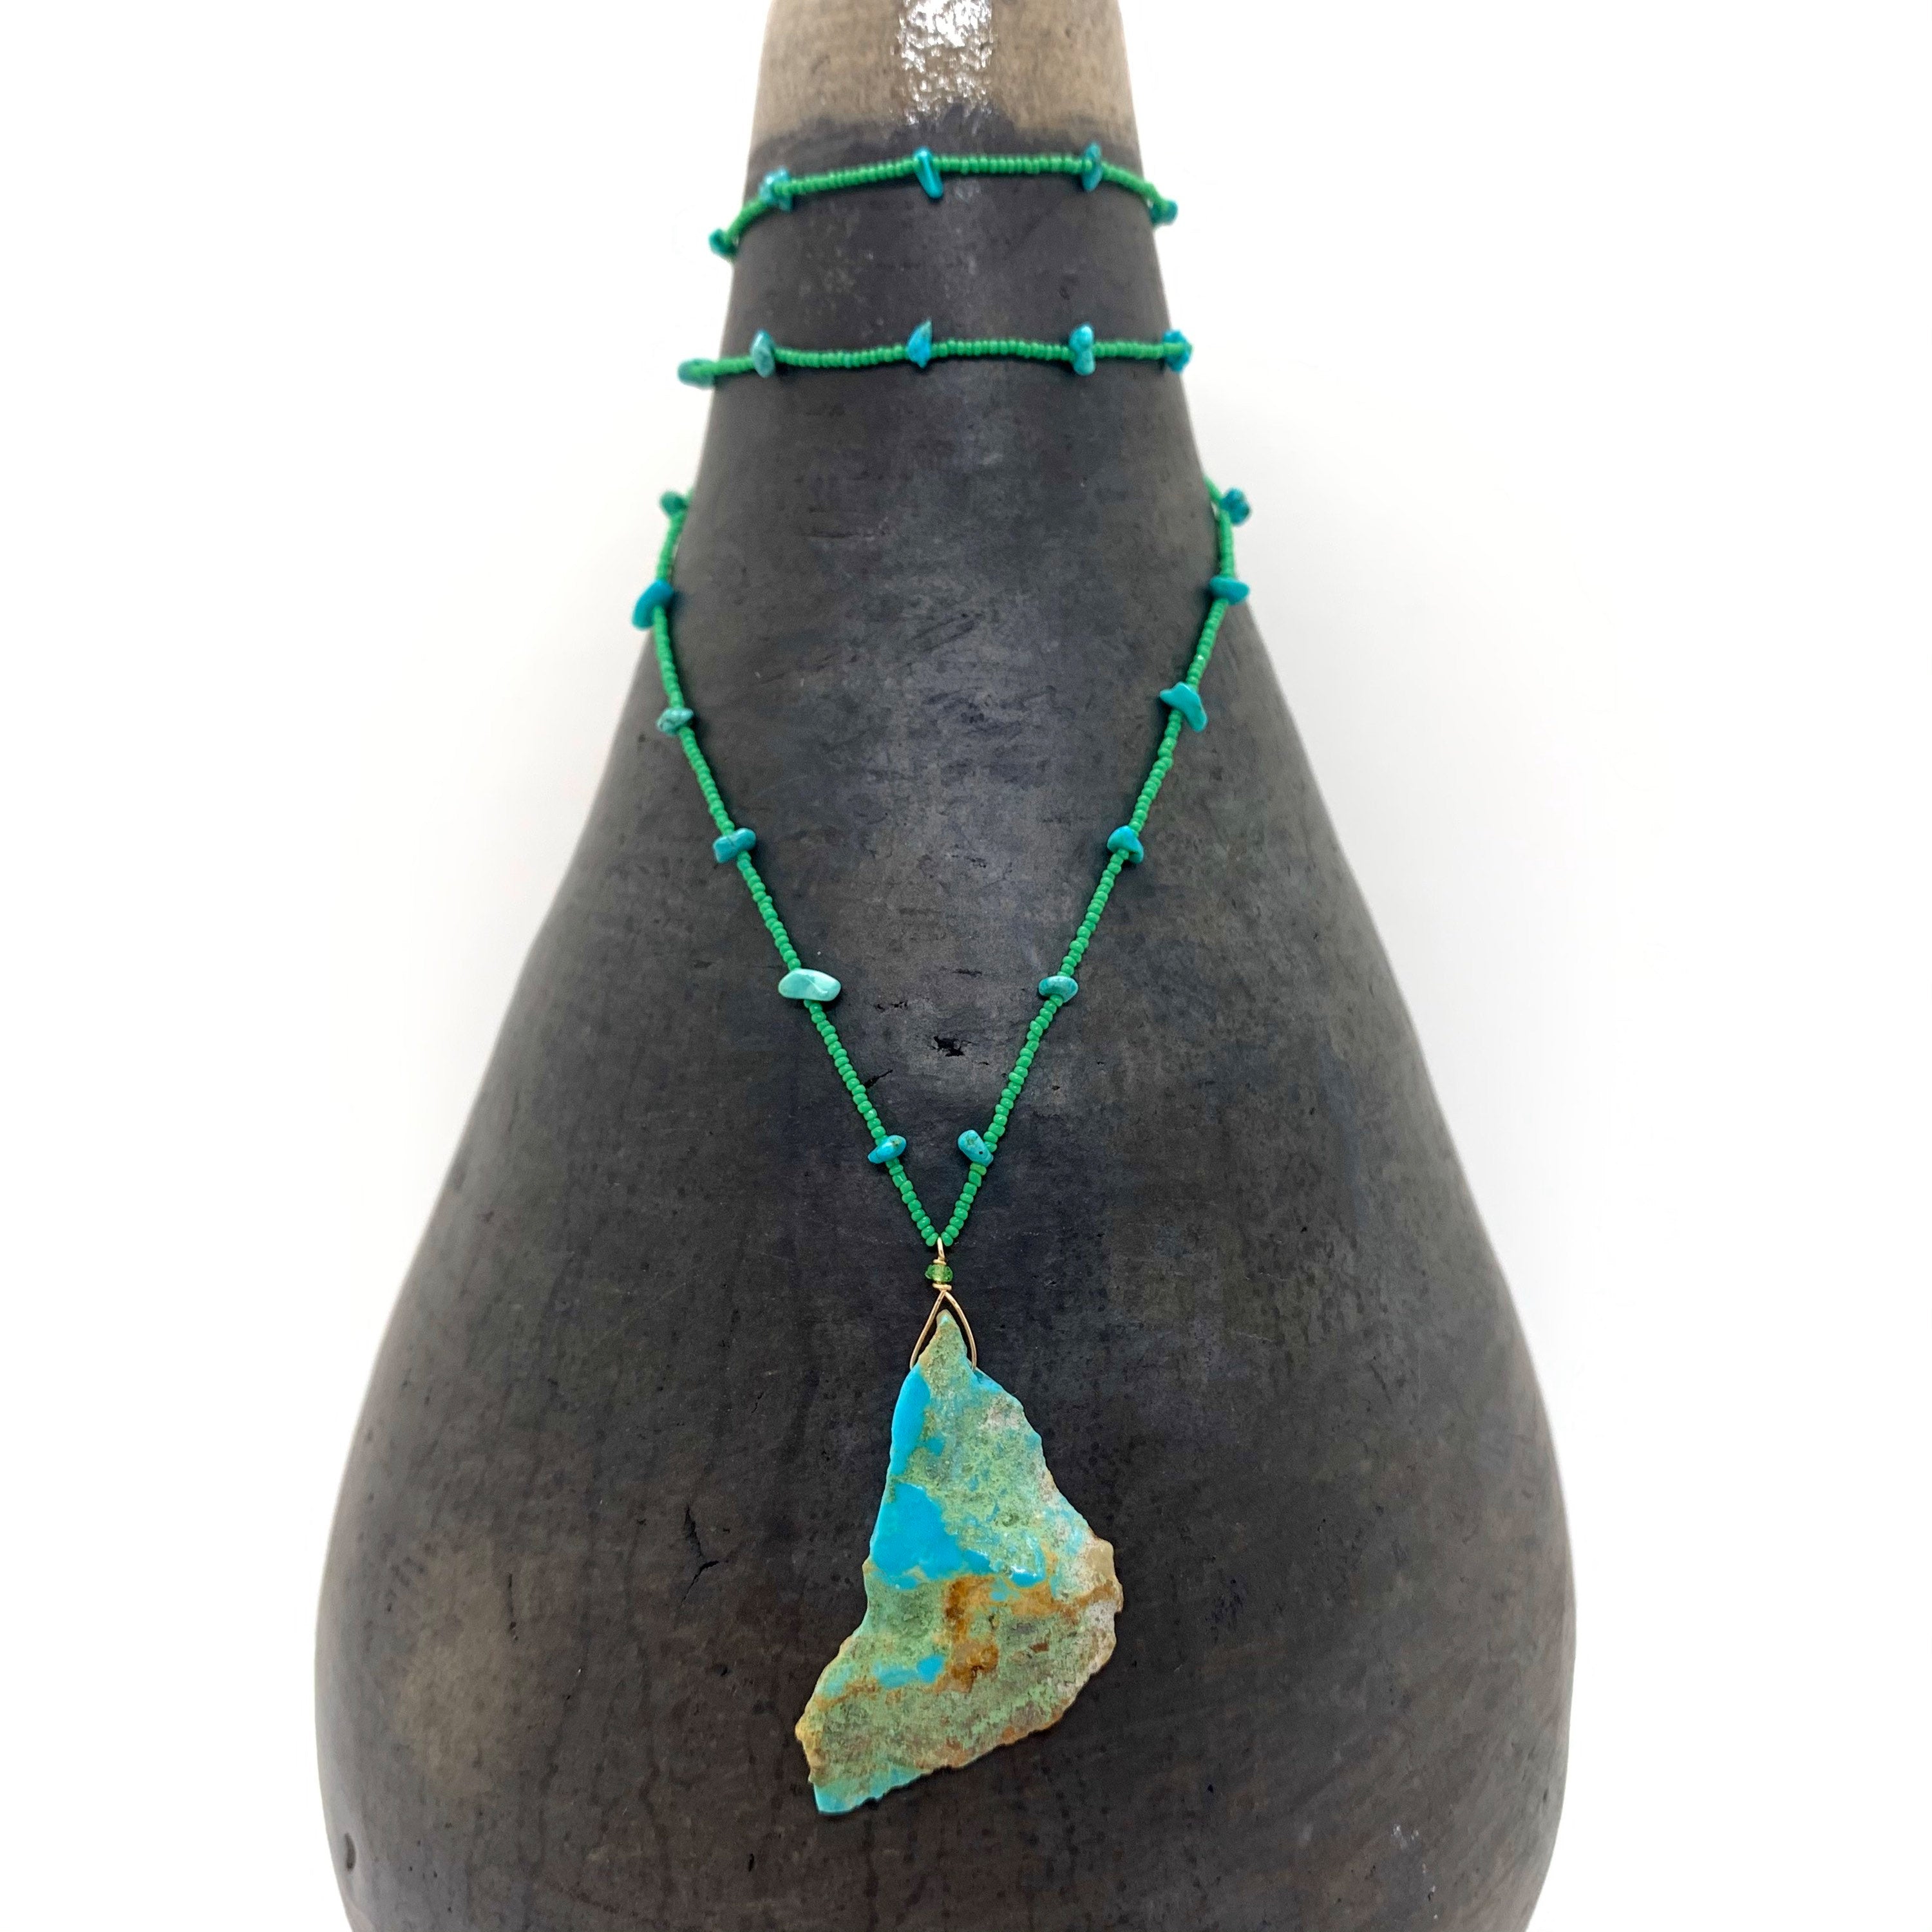 String Beaded Necklace w/ Turquoise Pendant, Turquoise Chips, Tsavorite & Antique Italian Beads